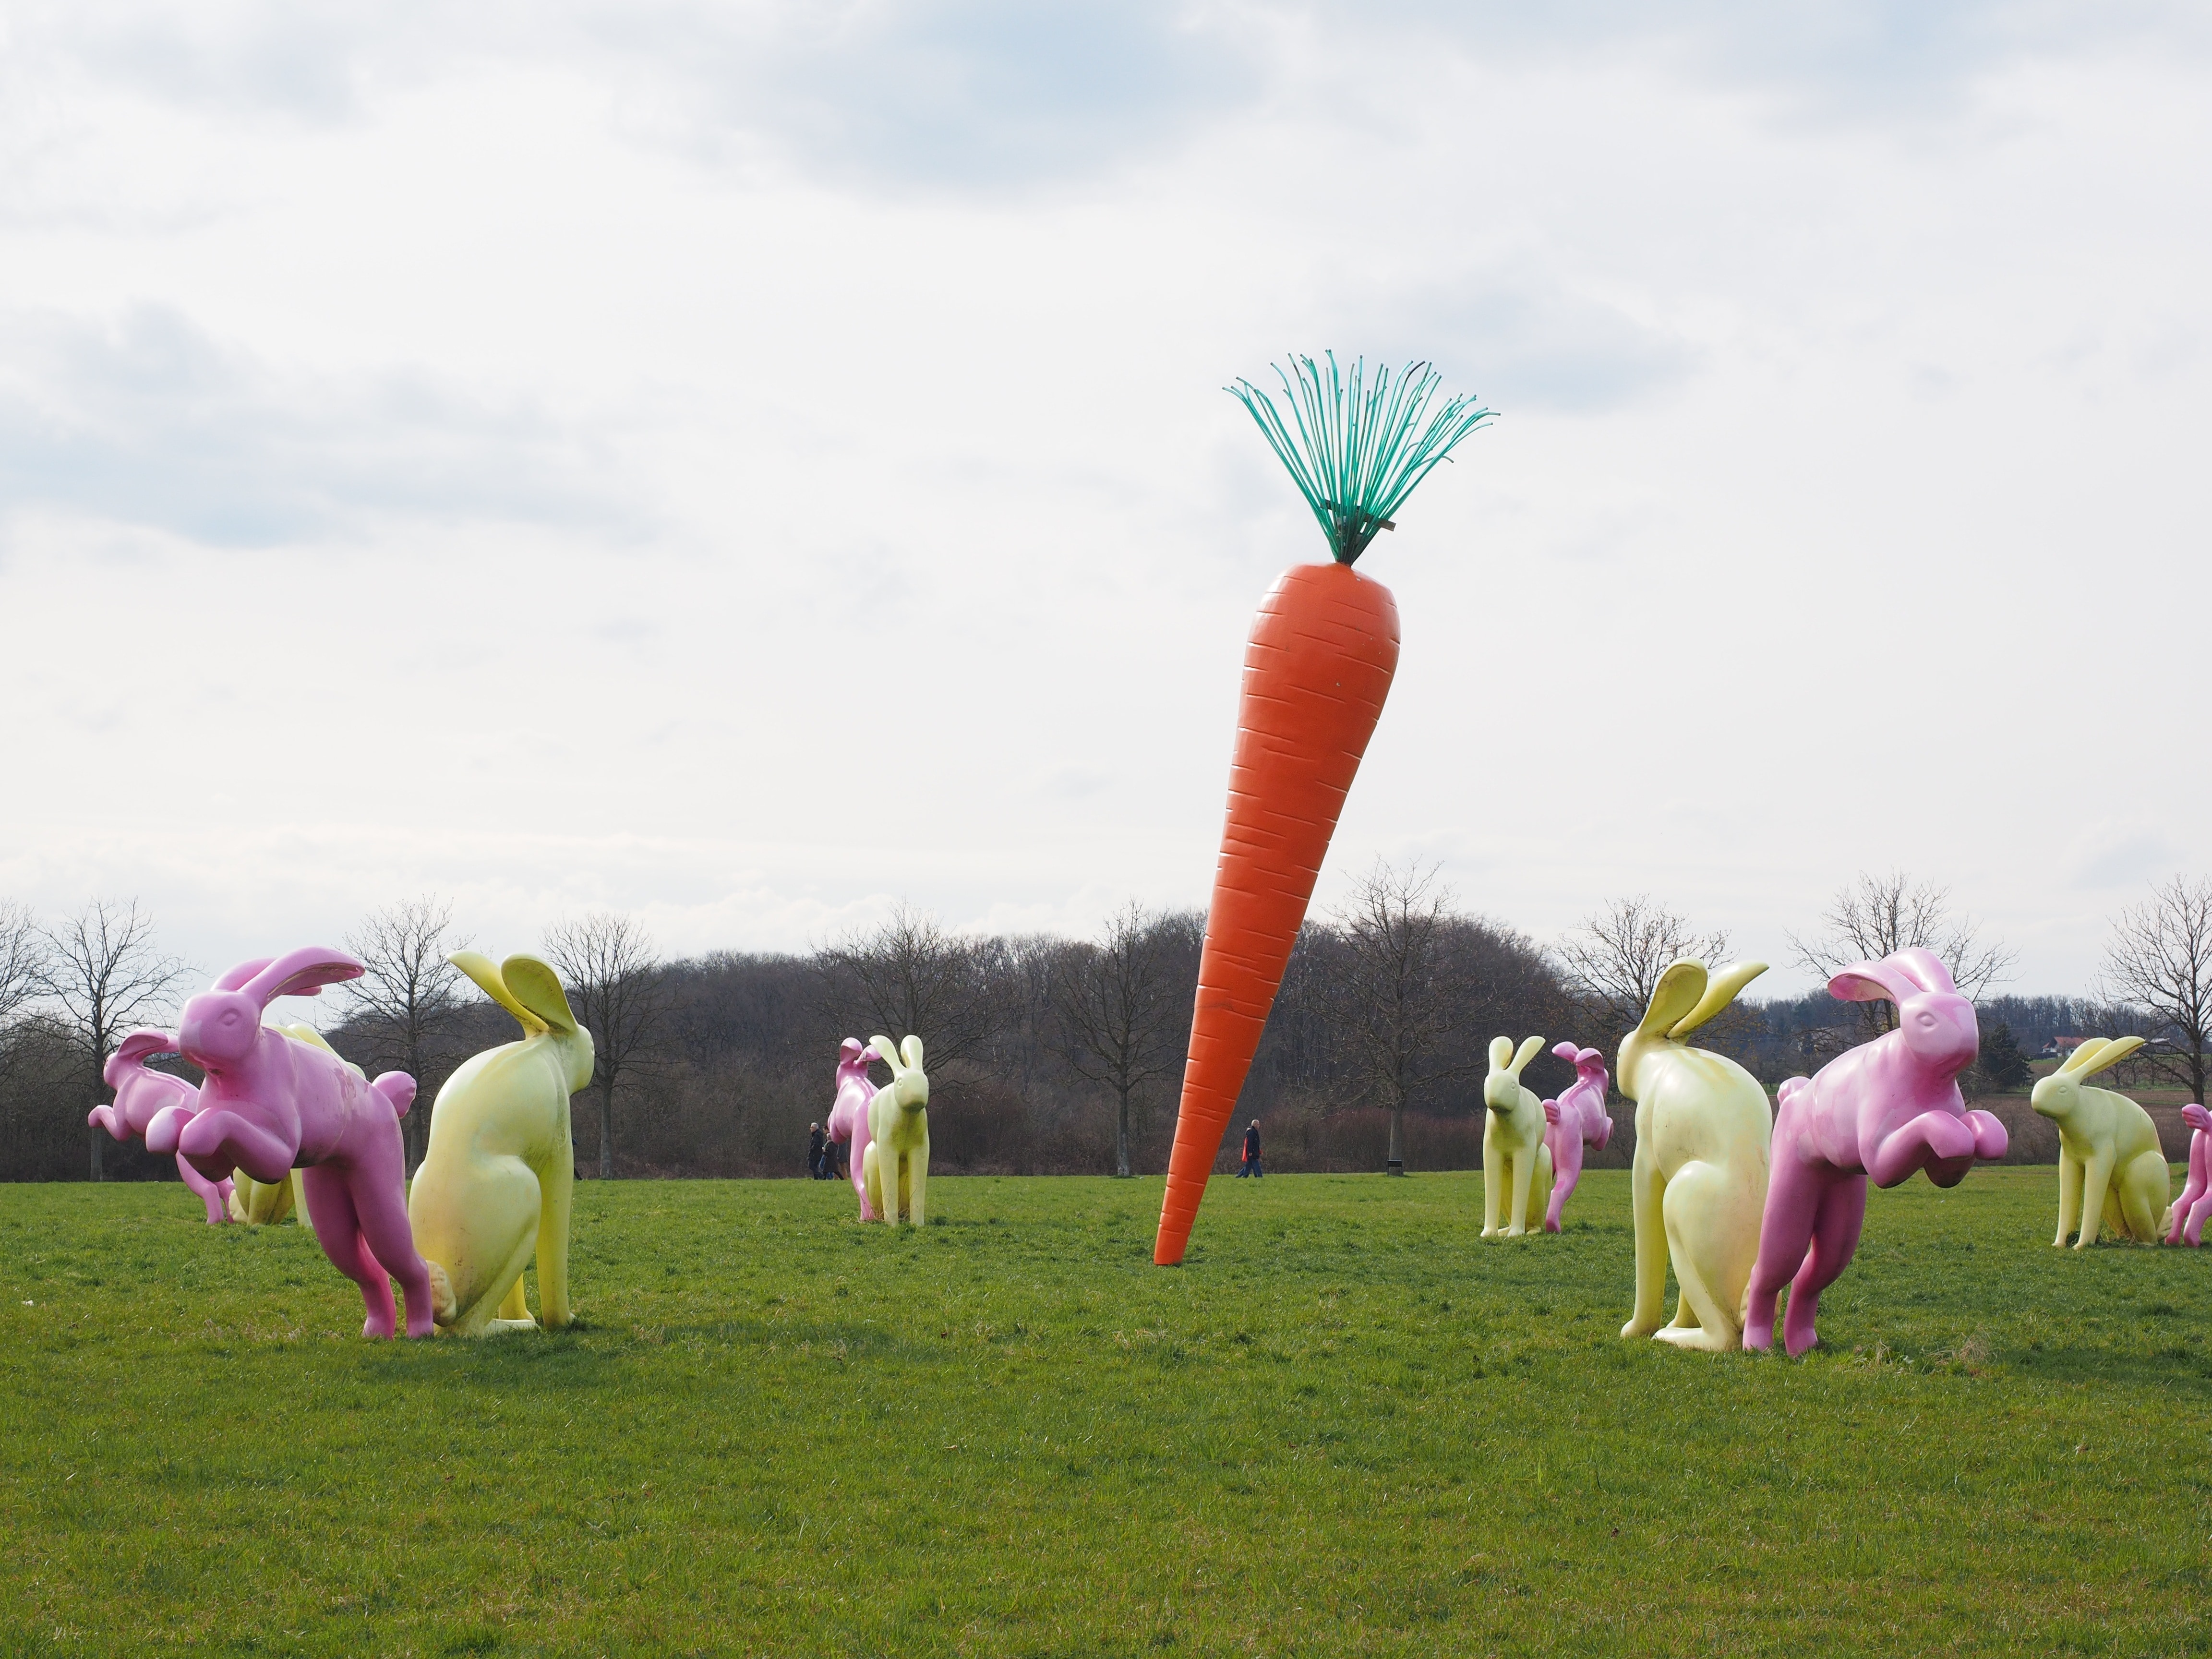 rabbit statues and carrot statue on green grass field